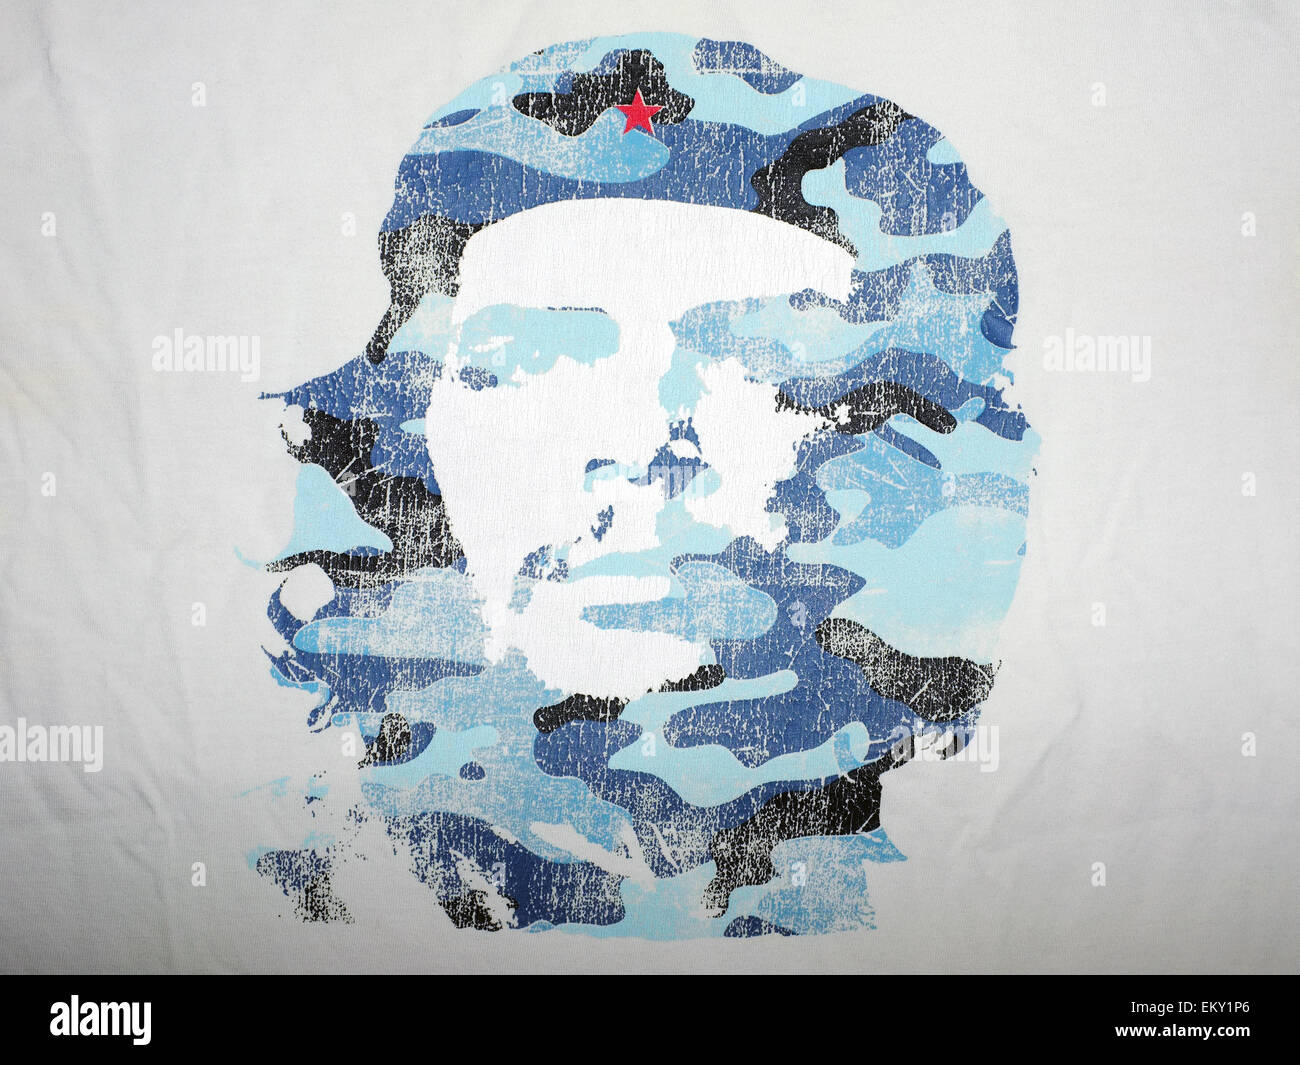 A blue camouflage image of Che Guevara printed on a with top. Stock Photo